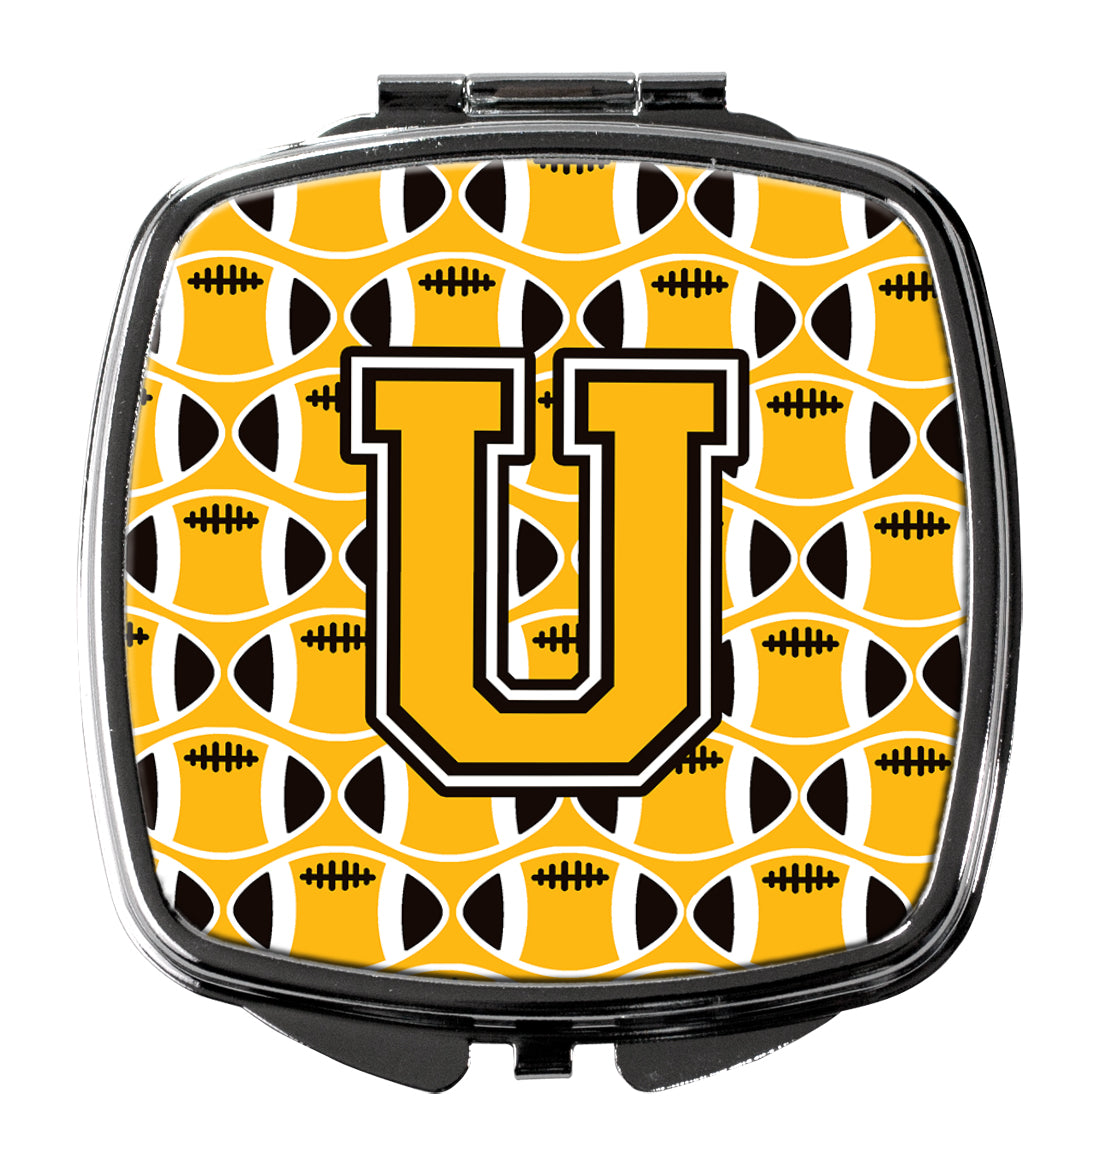 Letter U Football Black, Old Gold and White Compact Mirror CJ1080-USCM